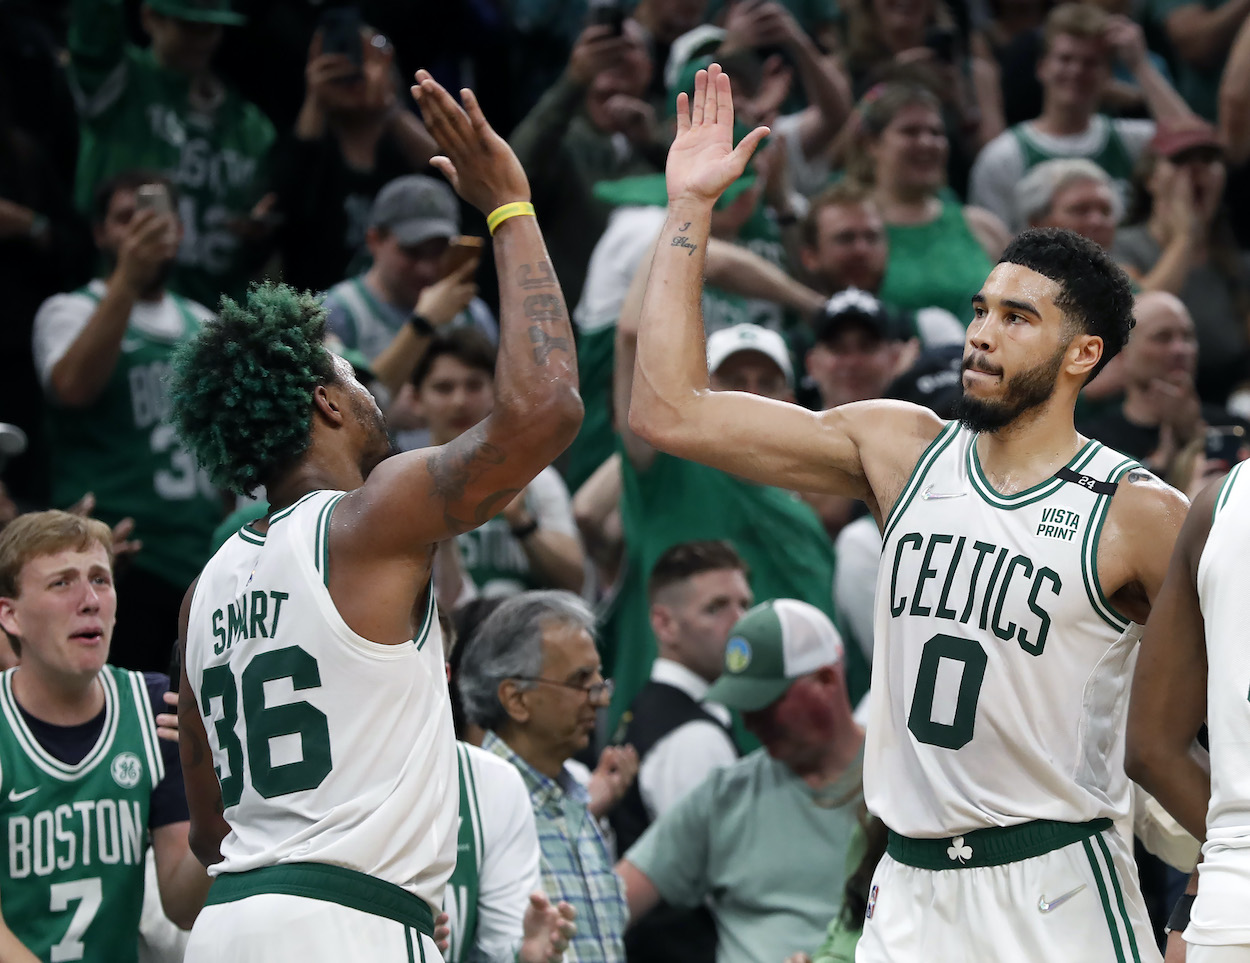 Boston Celtics: How Many Eastern Conference Finals Appearances Does the Iconic Franchise Have?